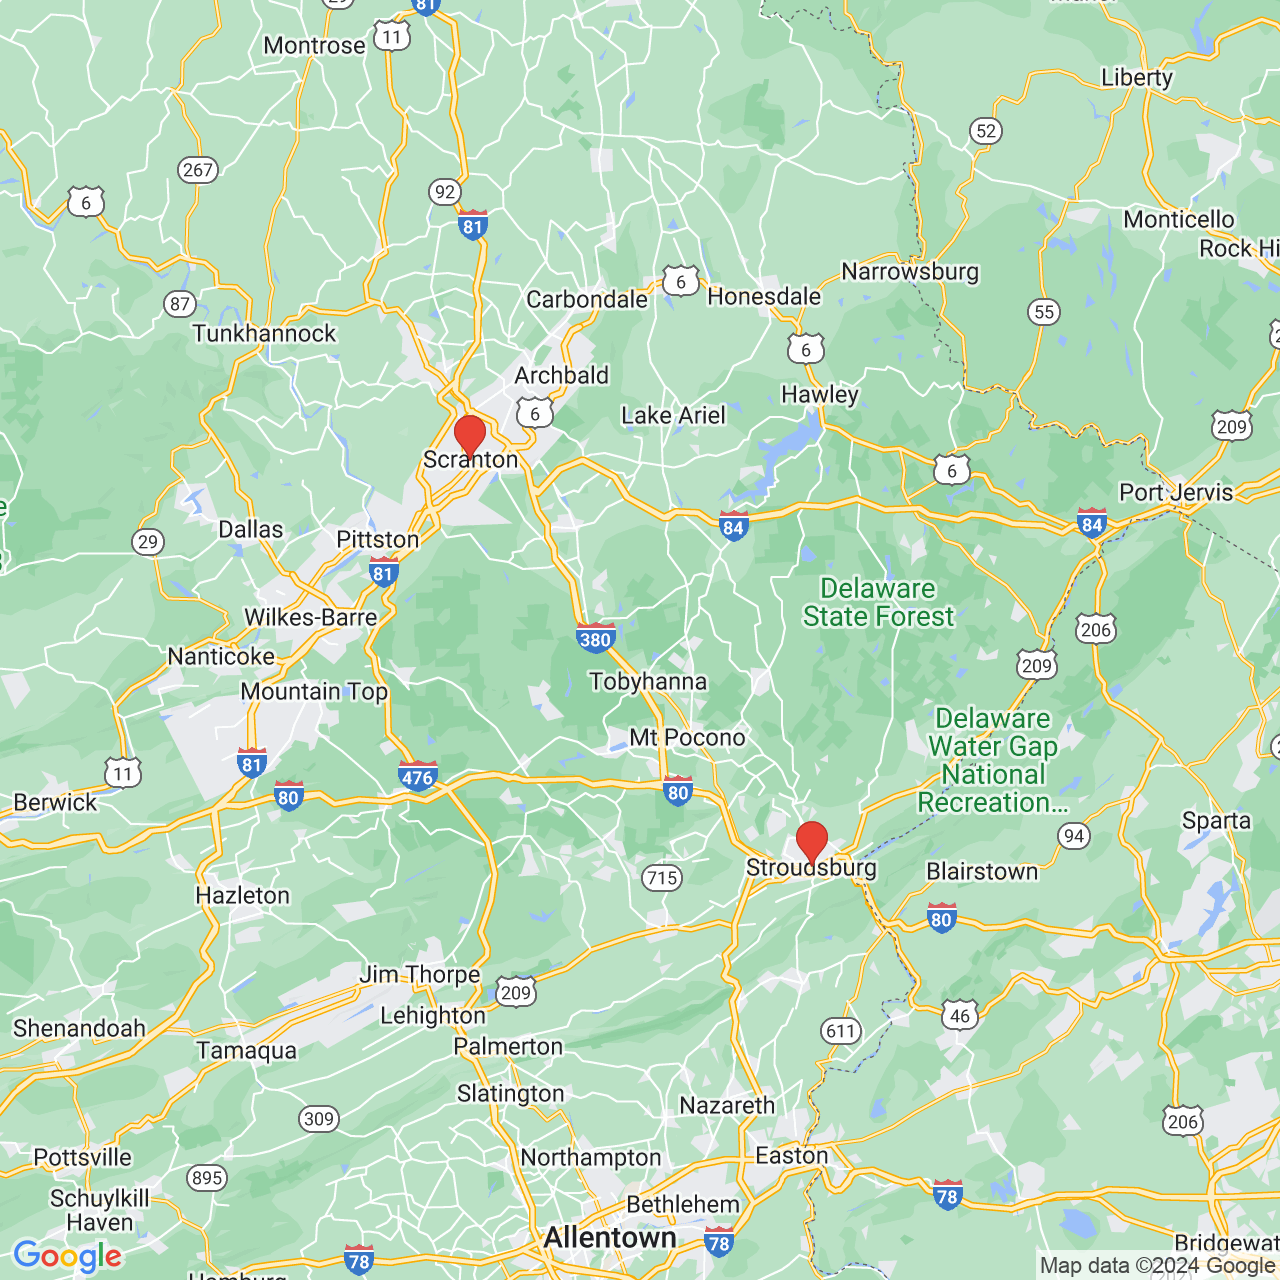 Google map image of our locations